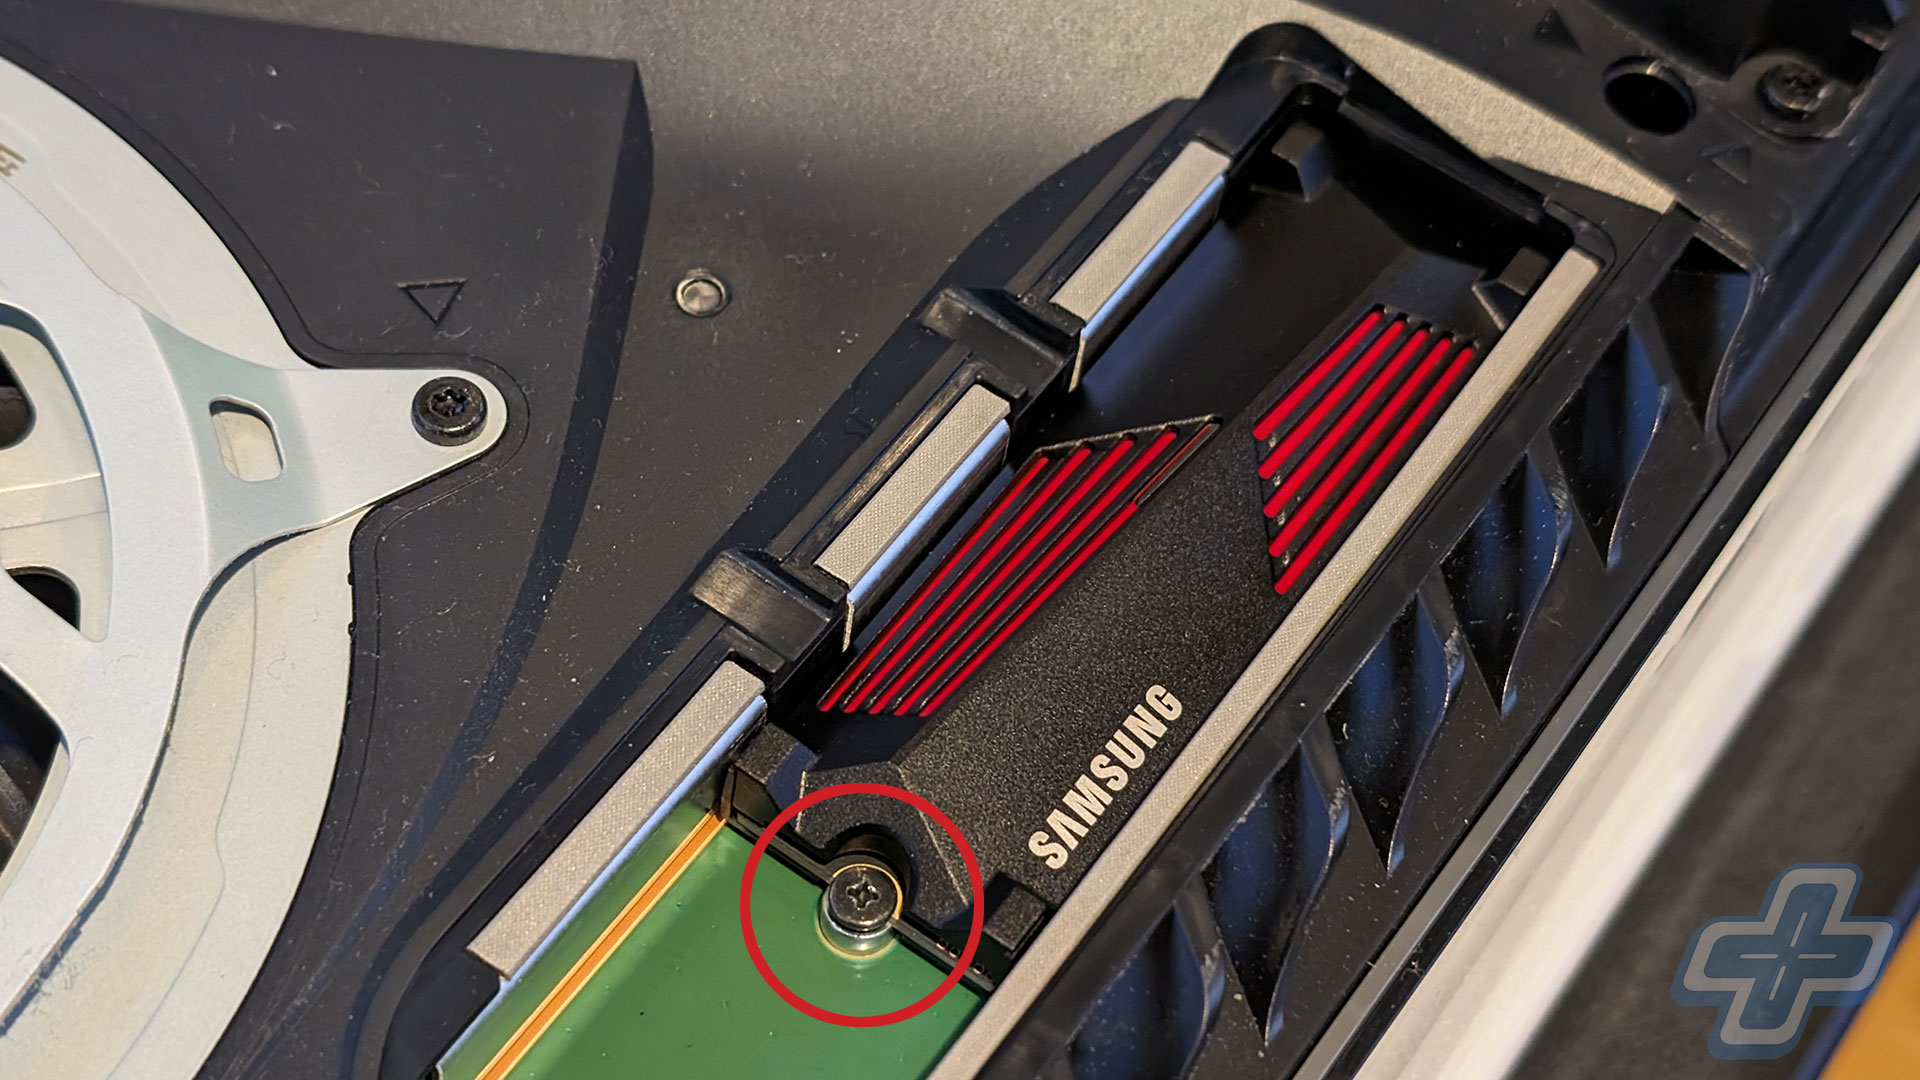 How-to add an SSD to the original PlayStation 5 console | Photo credit: Jason Siu, FullCleared